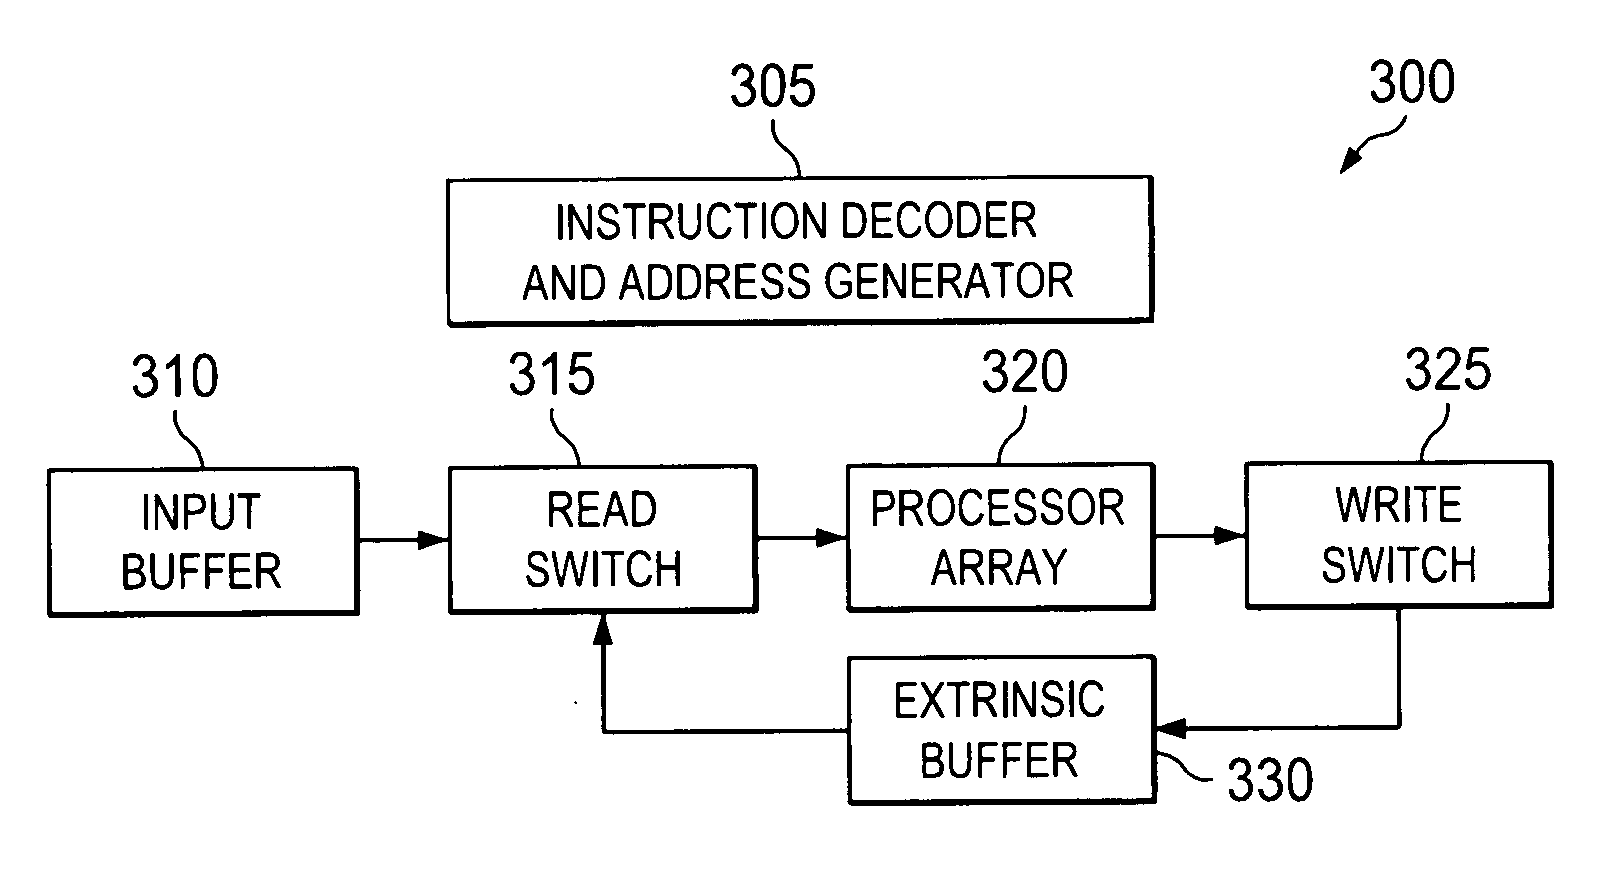 System and method for structured LDPC code family with fixed code length and no puncturing